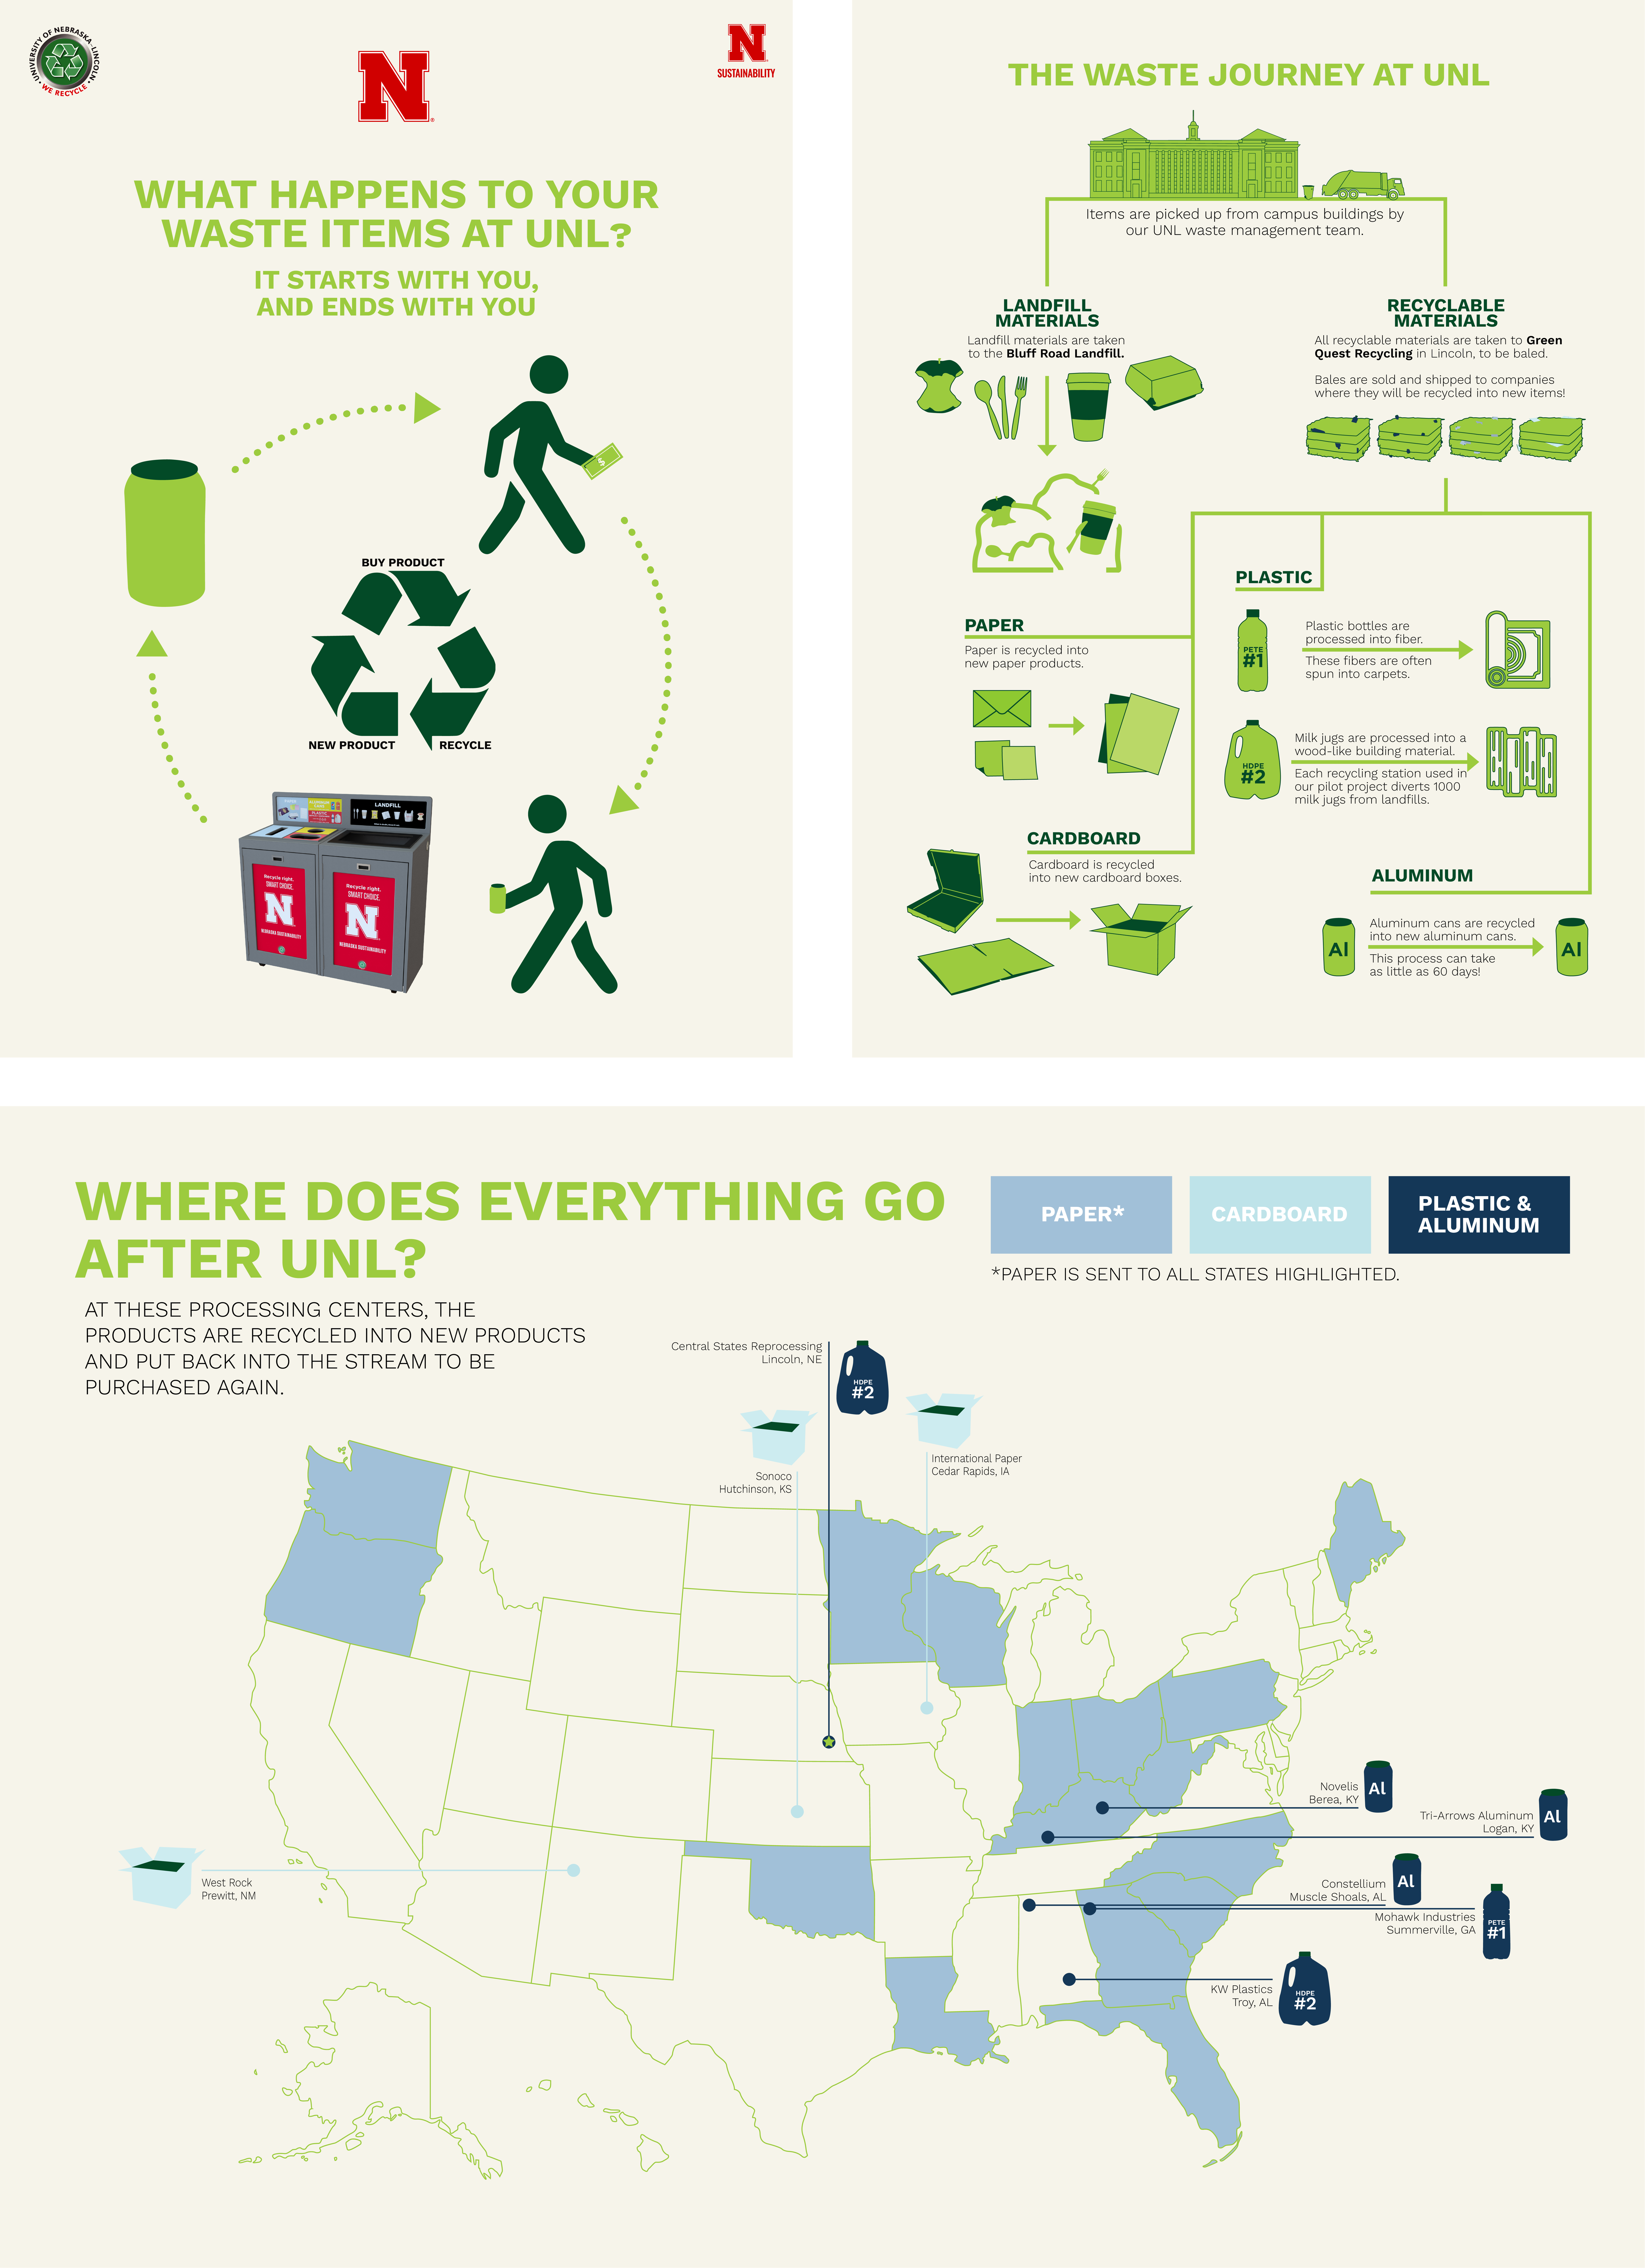 The Journey of Waste Infographic shows that landfill items are sent to the landfill on Bluff Road, and recyclables are sent to GreenQuest recycling